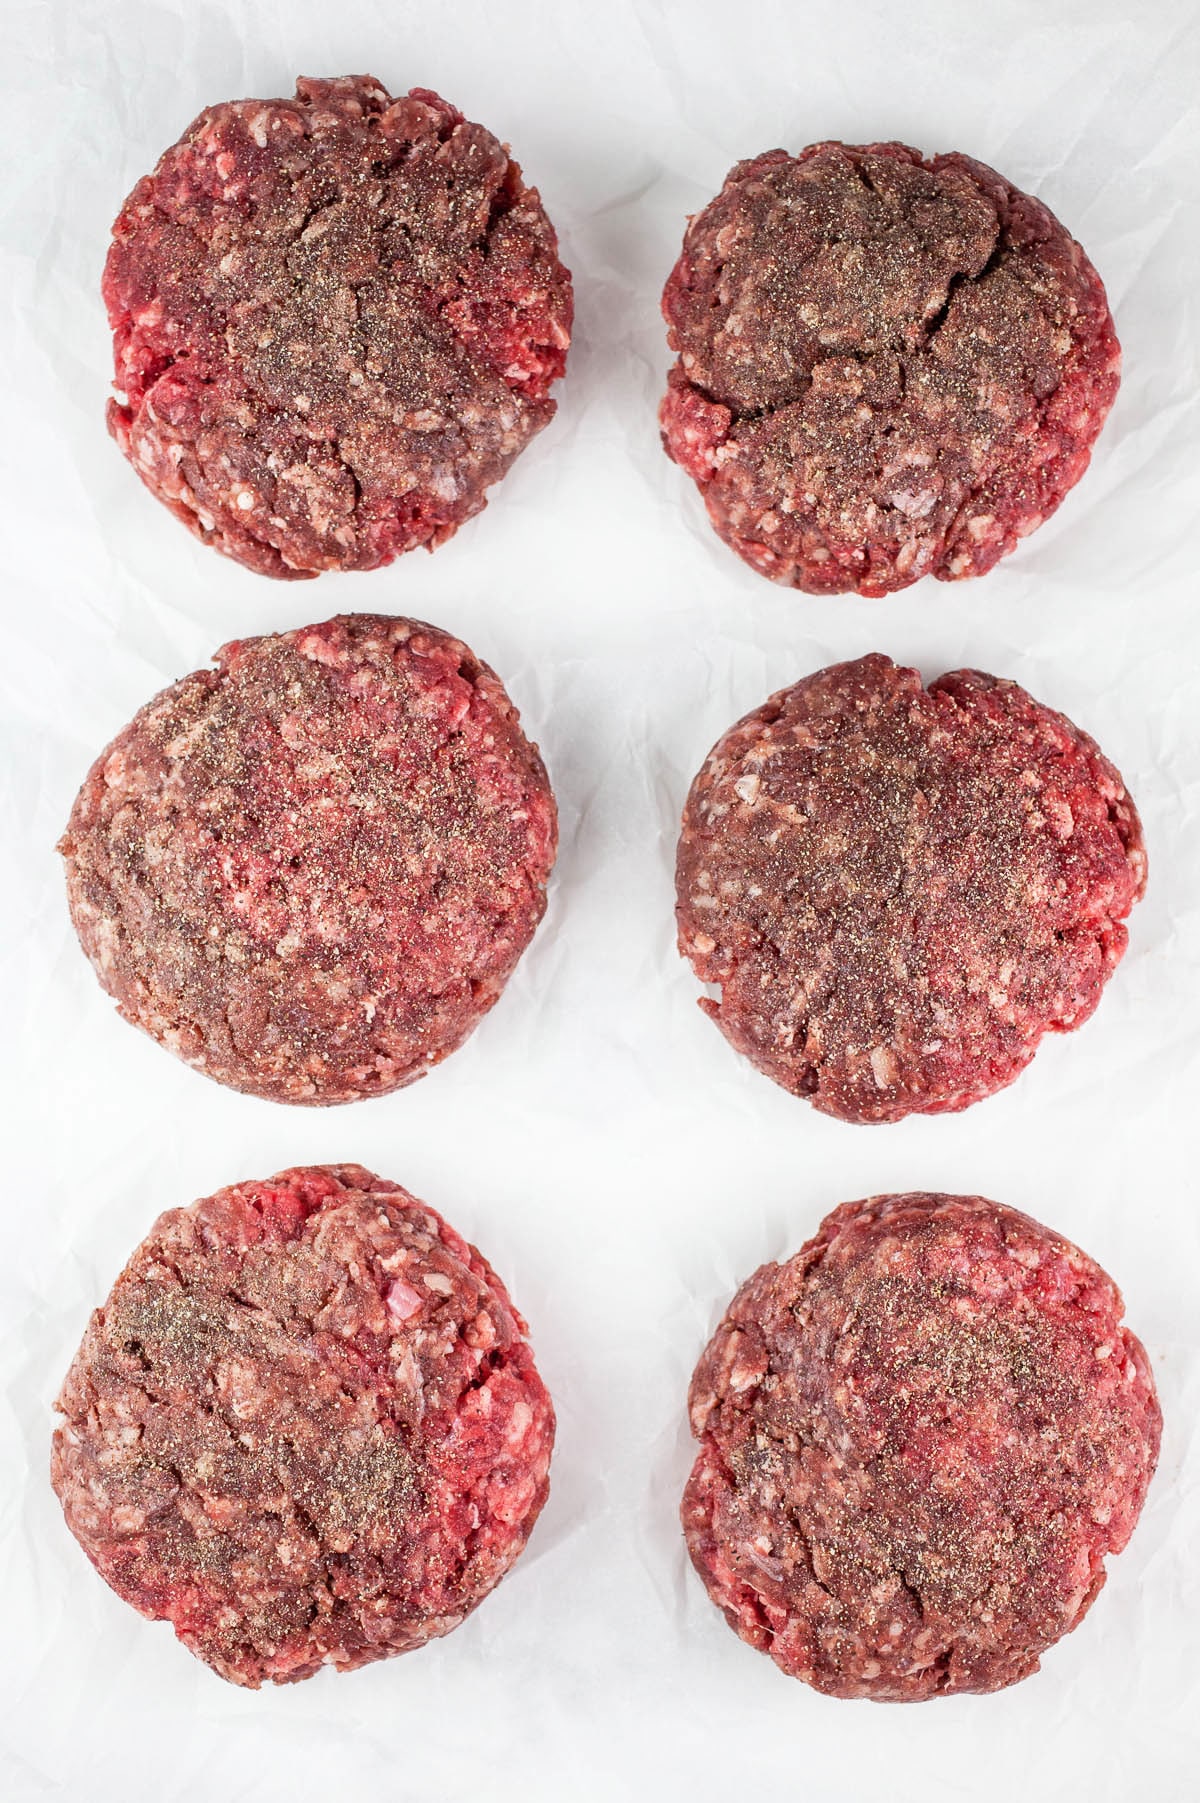 Raw ground beef patties with seasoning on white surface.